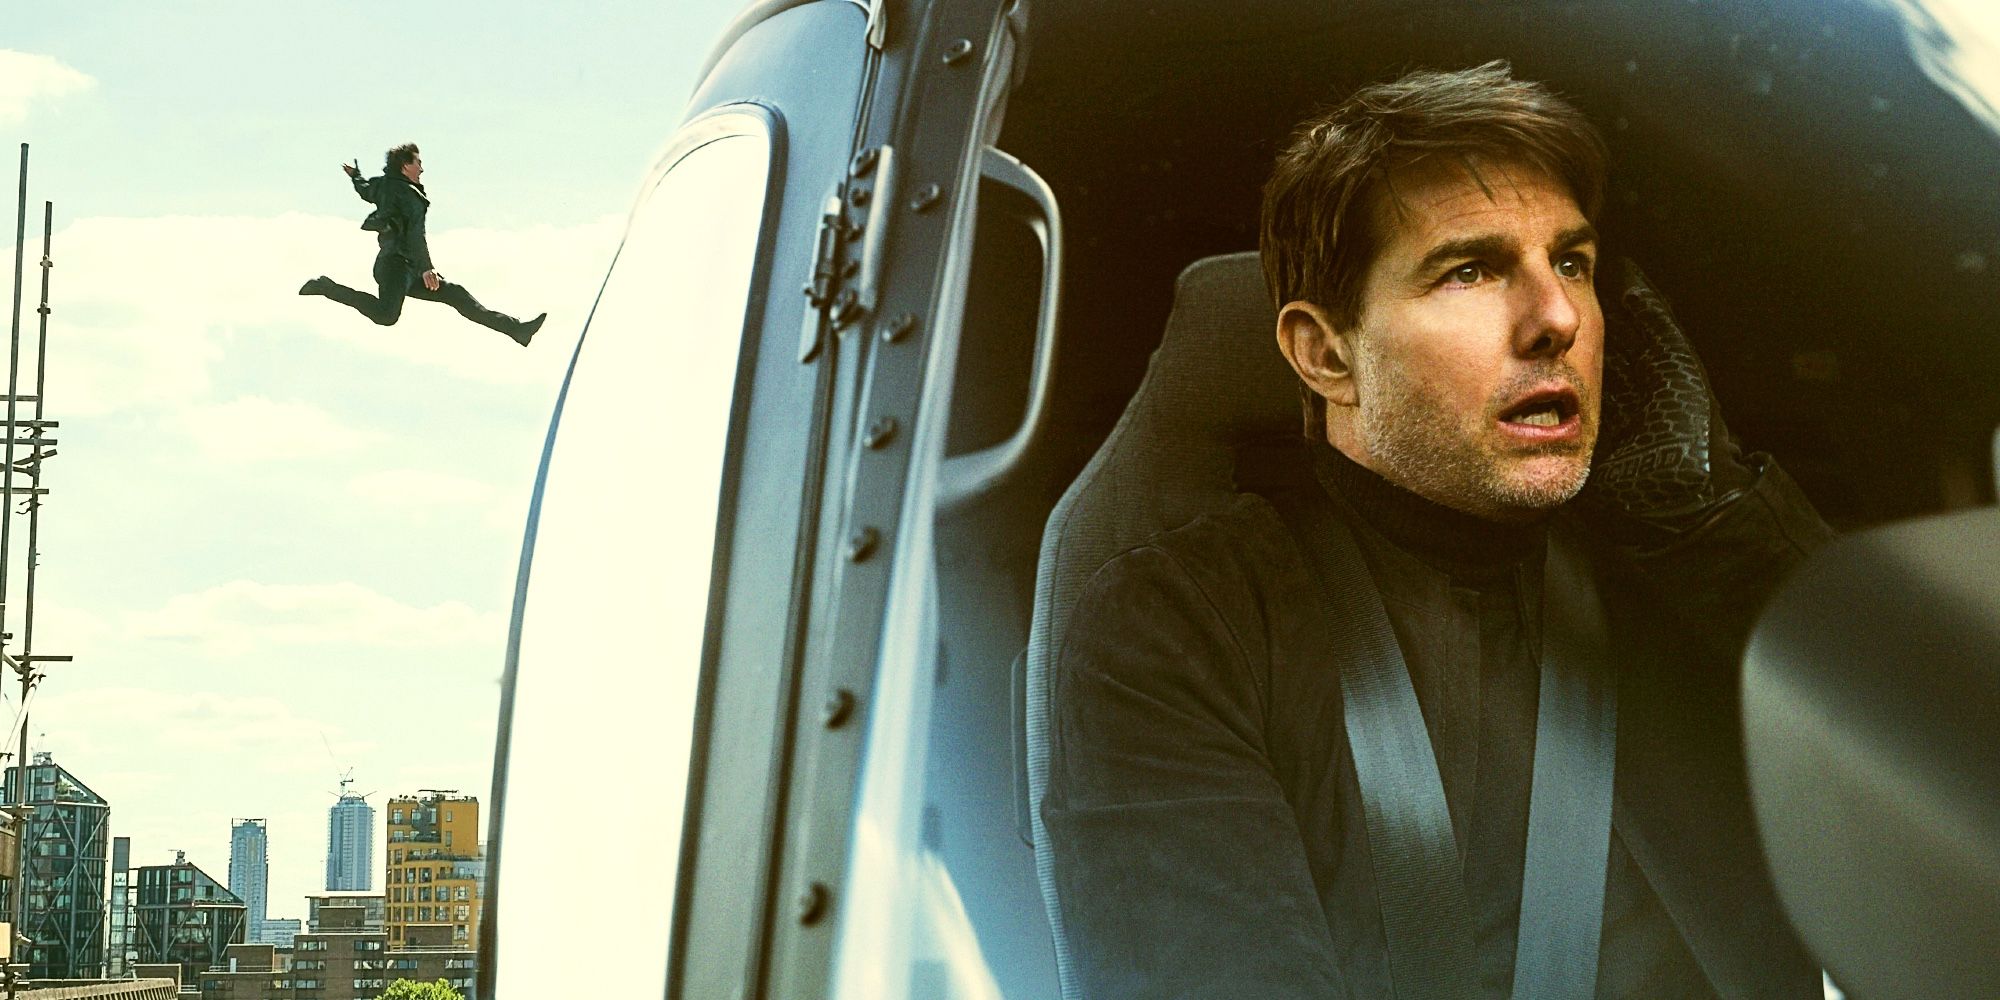 mission:impossible wild tom cruise behind the scenes stories explain why the franchise is so great good